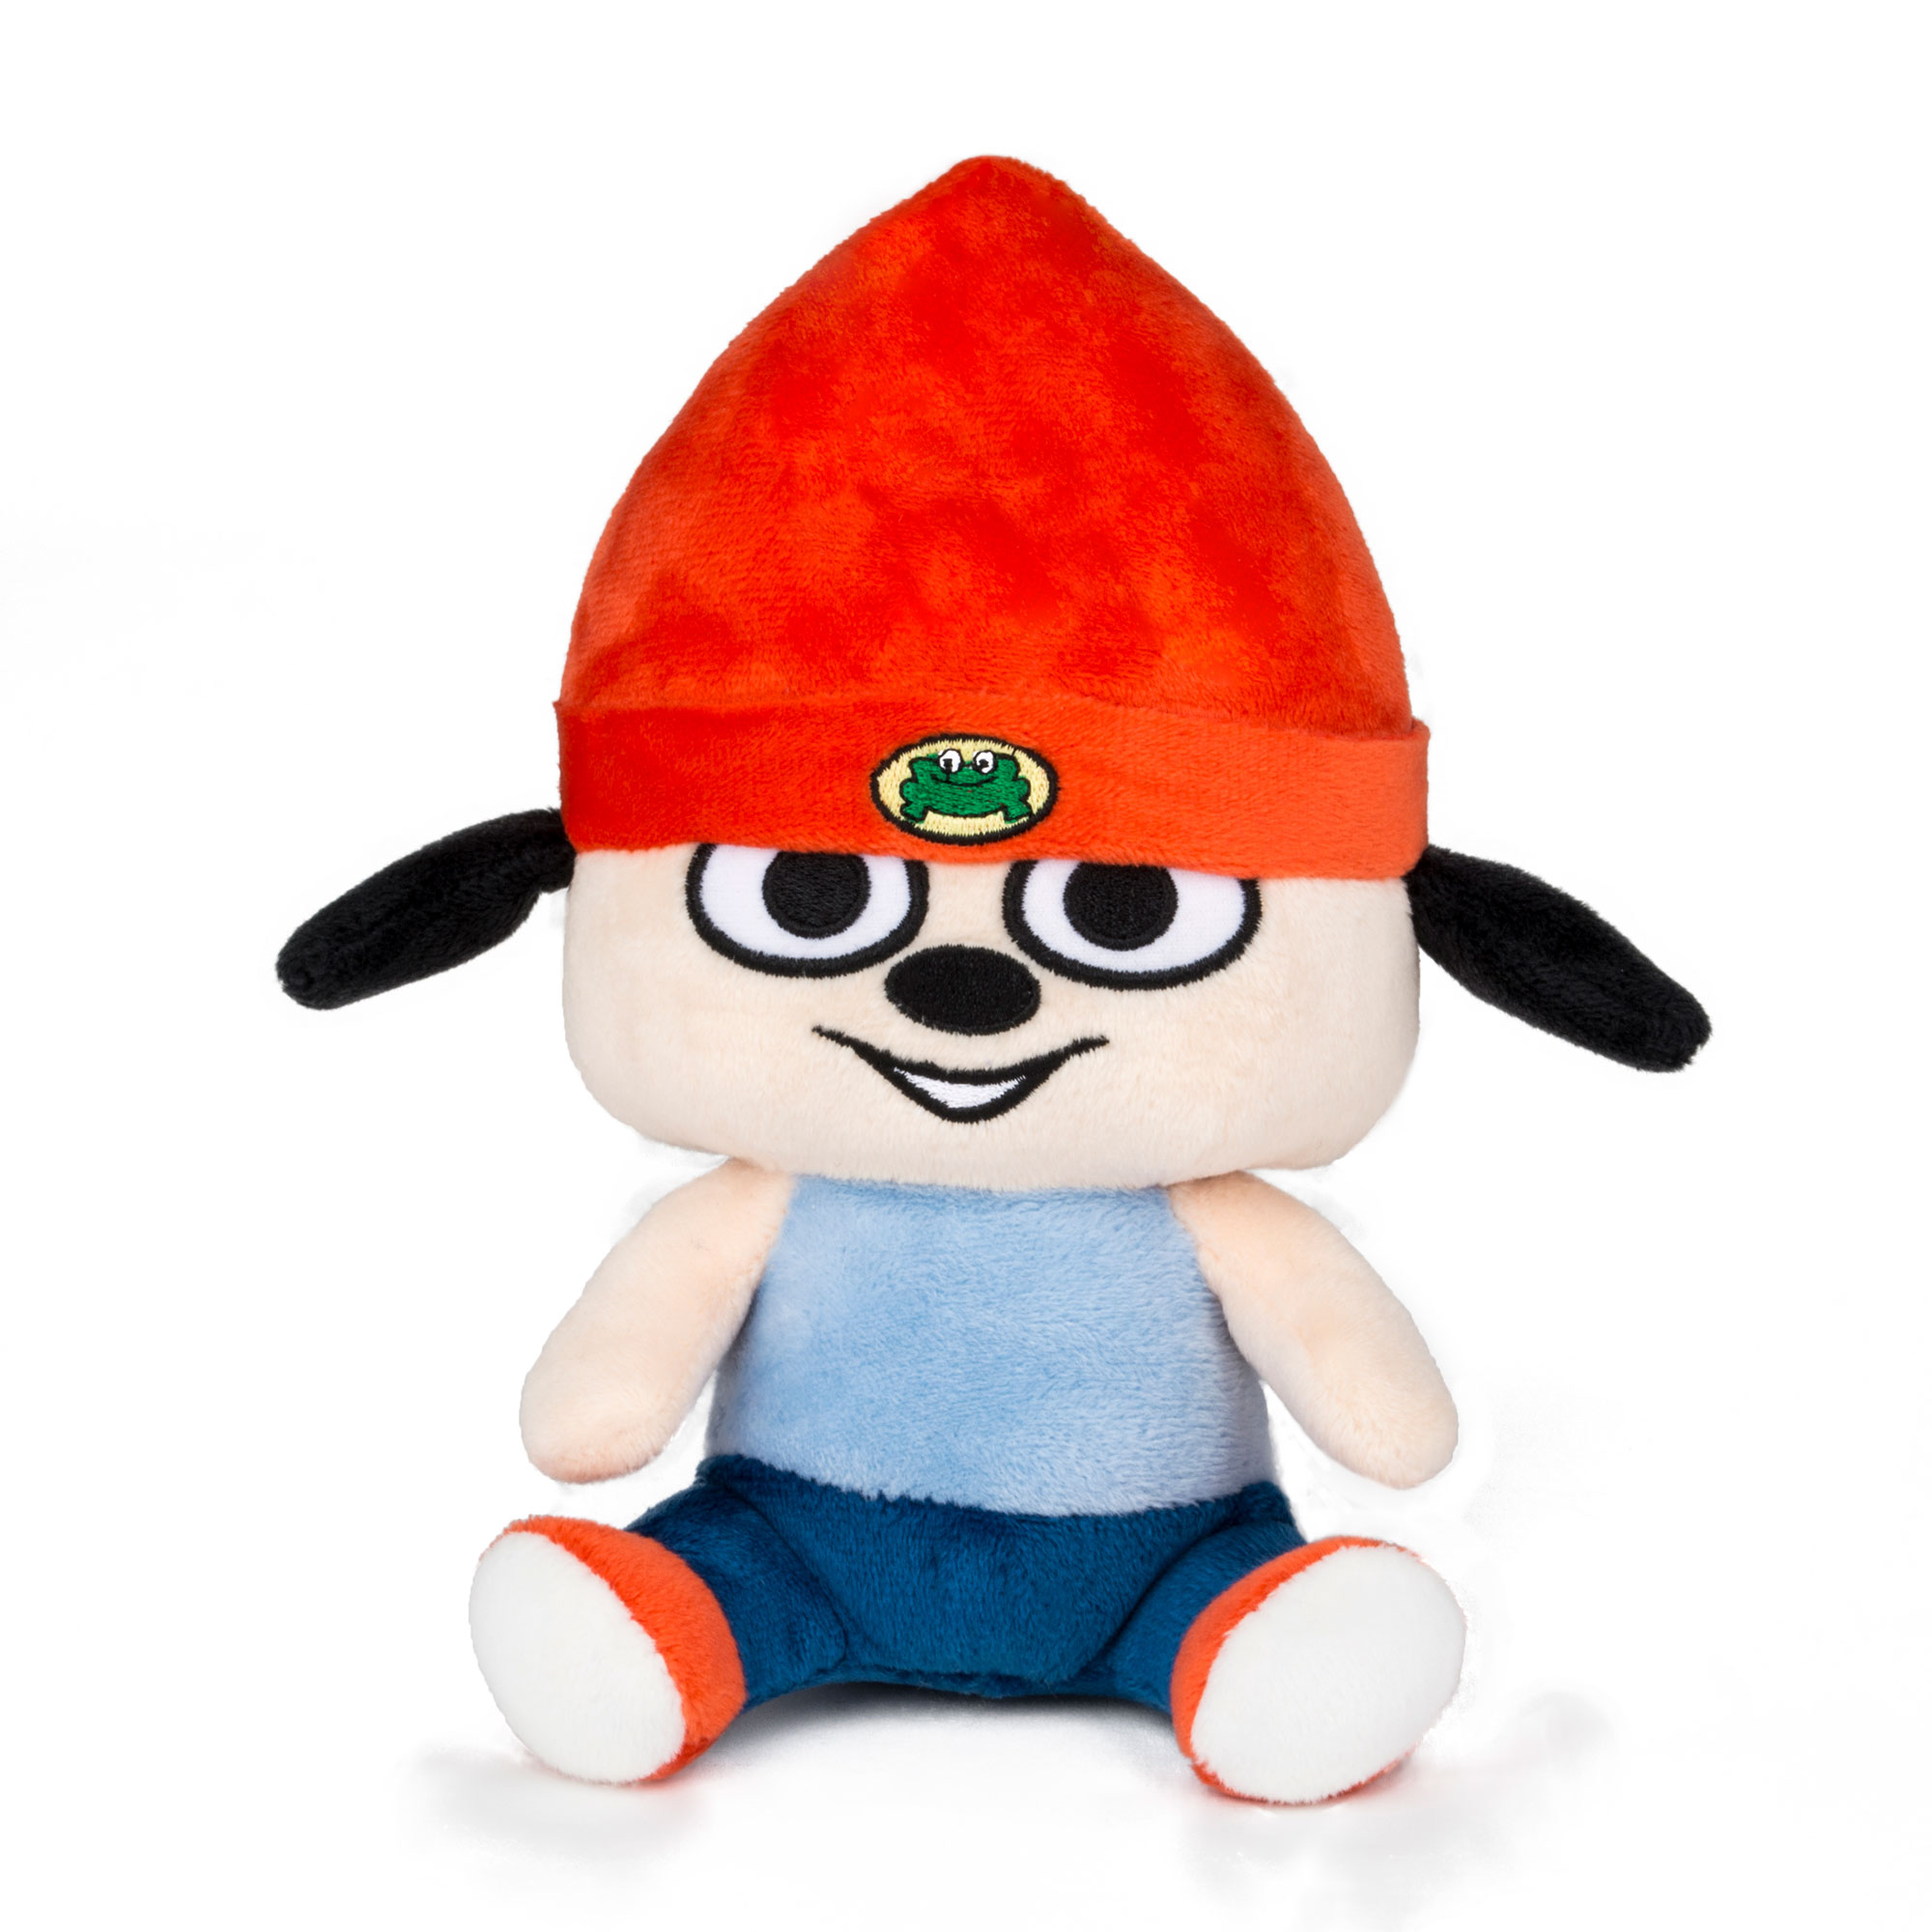 Let PaRappa from PaRappa the Rapper rap his way into your life with the Stu...